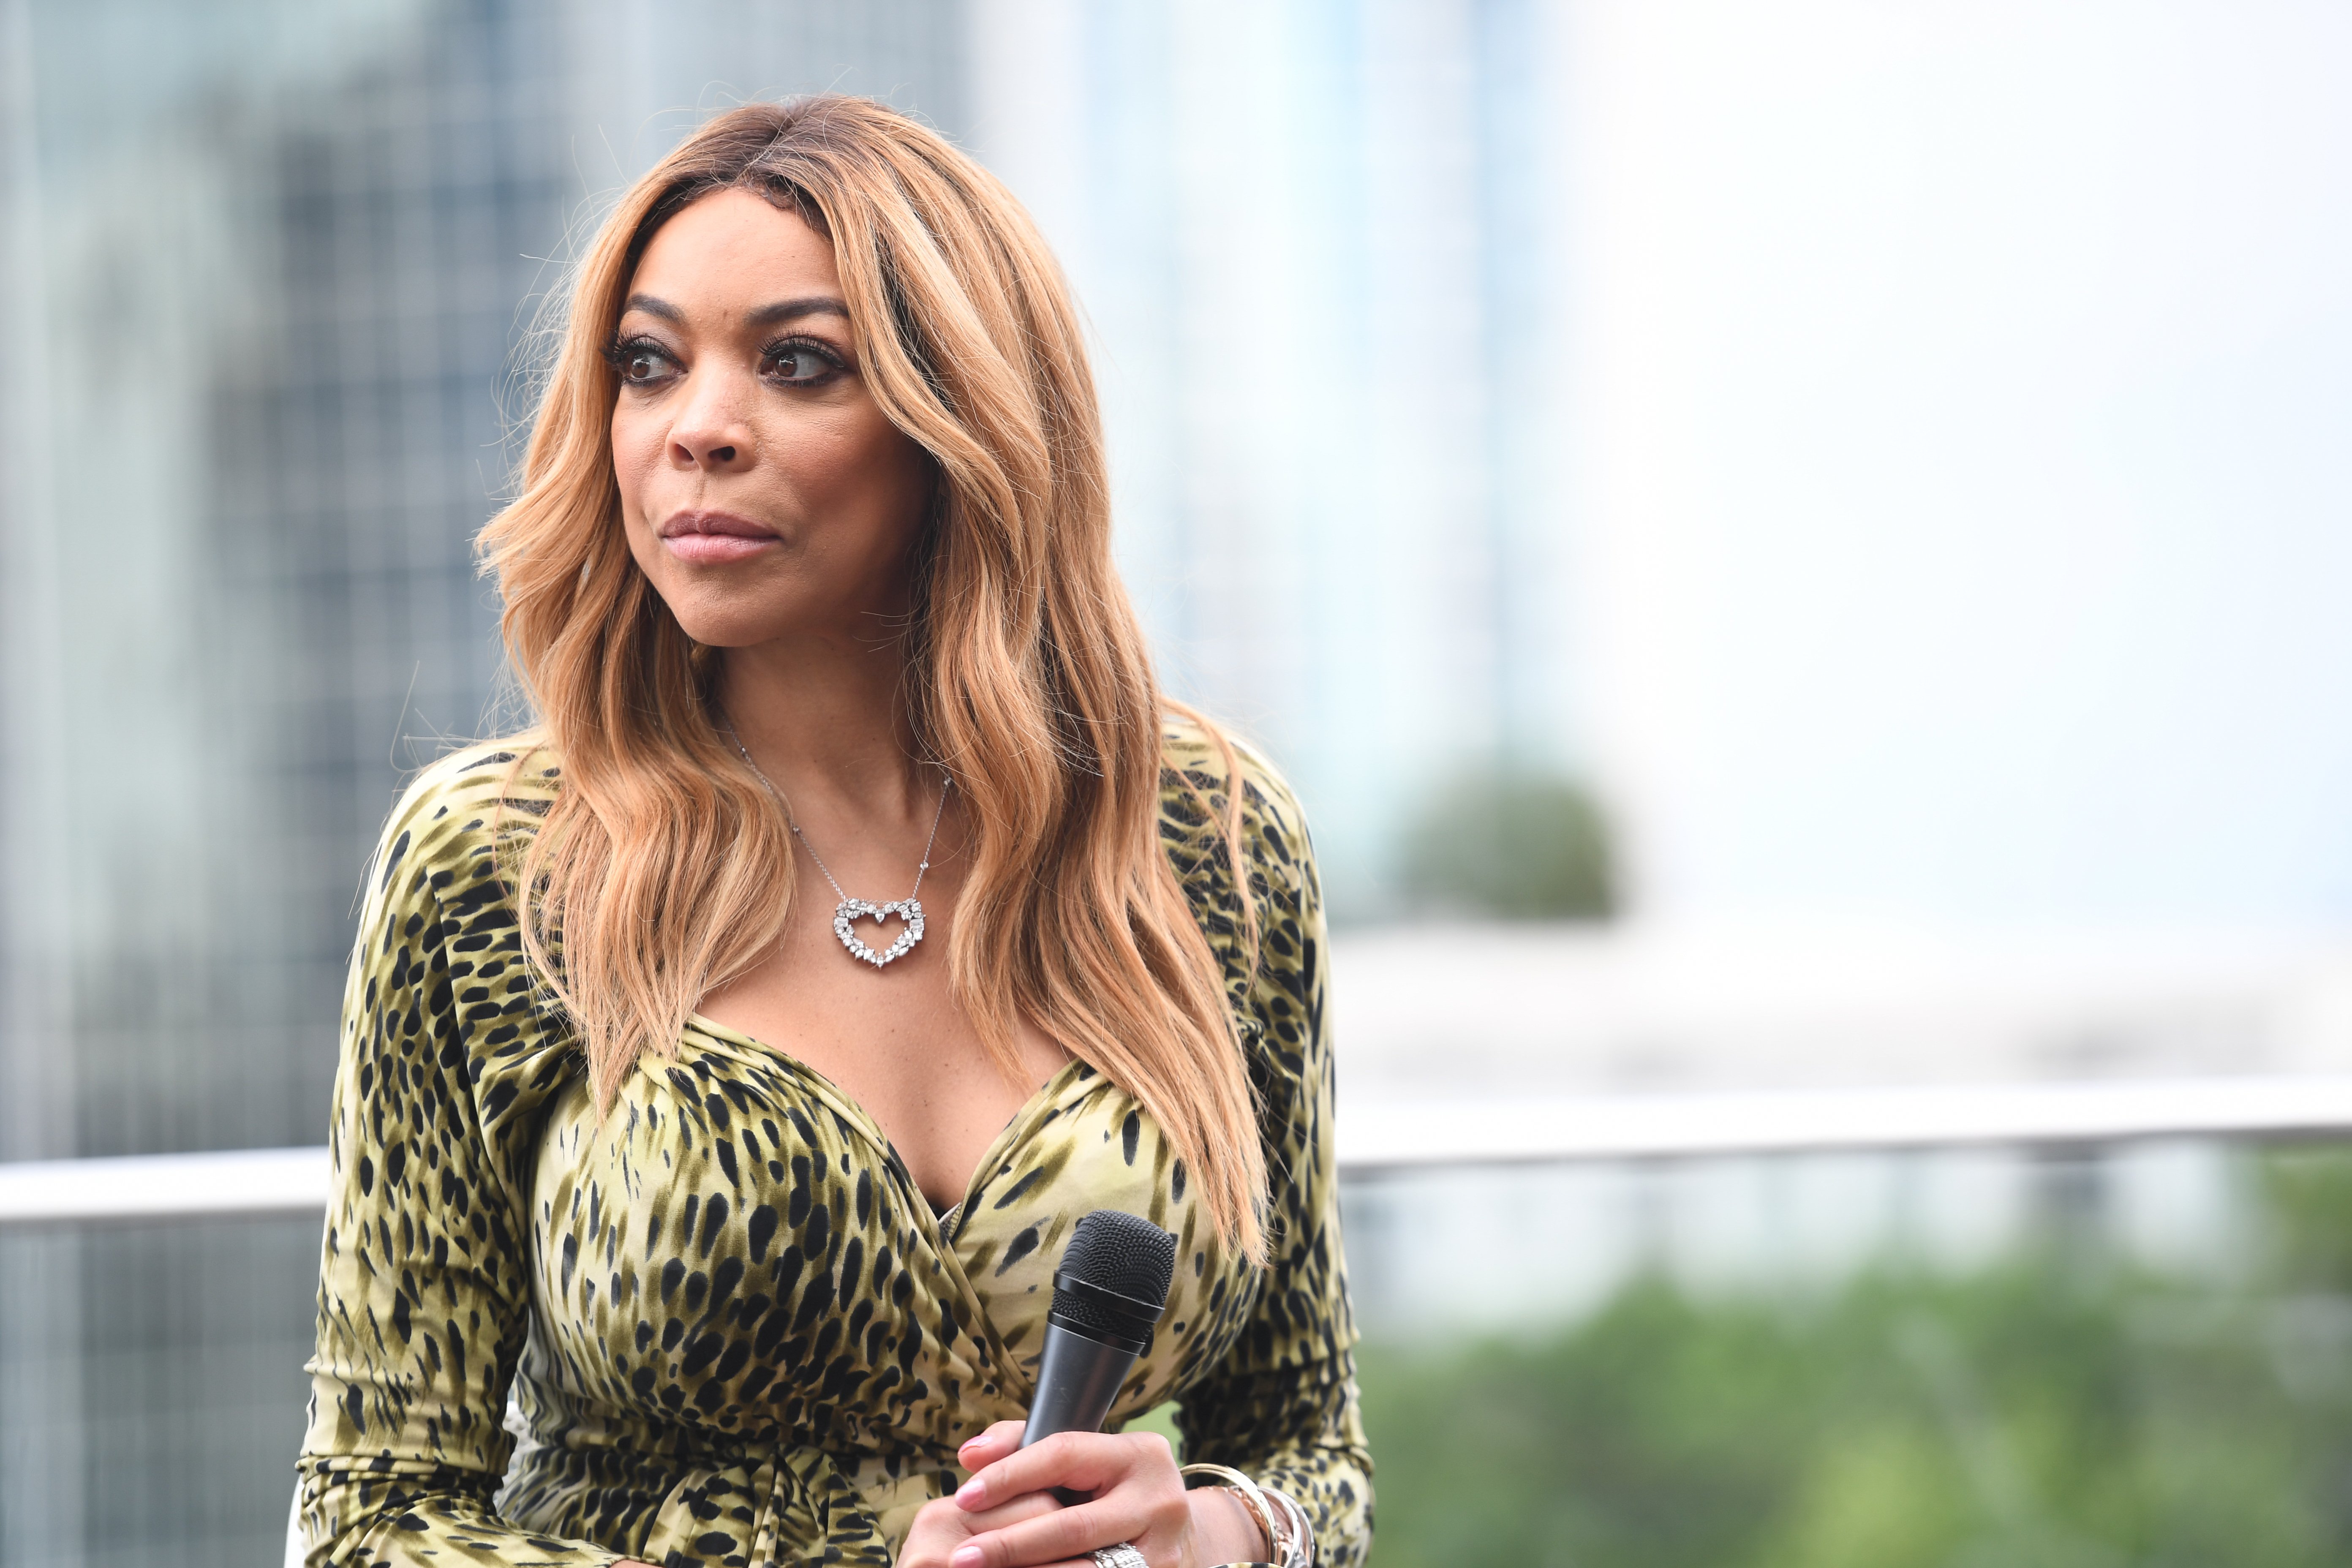 Wendy Williams attends Wendy Digital Event at Atlanta Tech Village Rooftop on August 29, 2017. | Photo: GettyImages